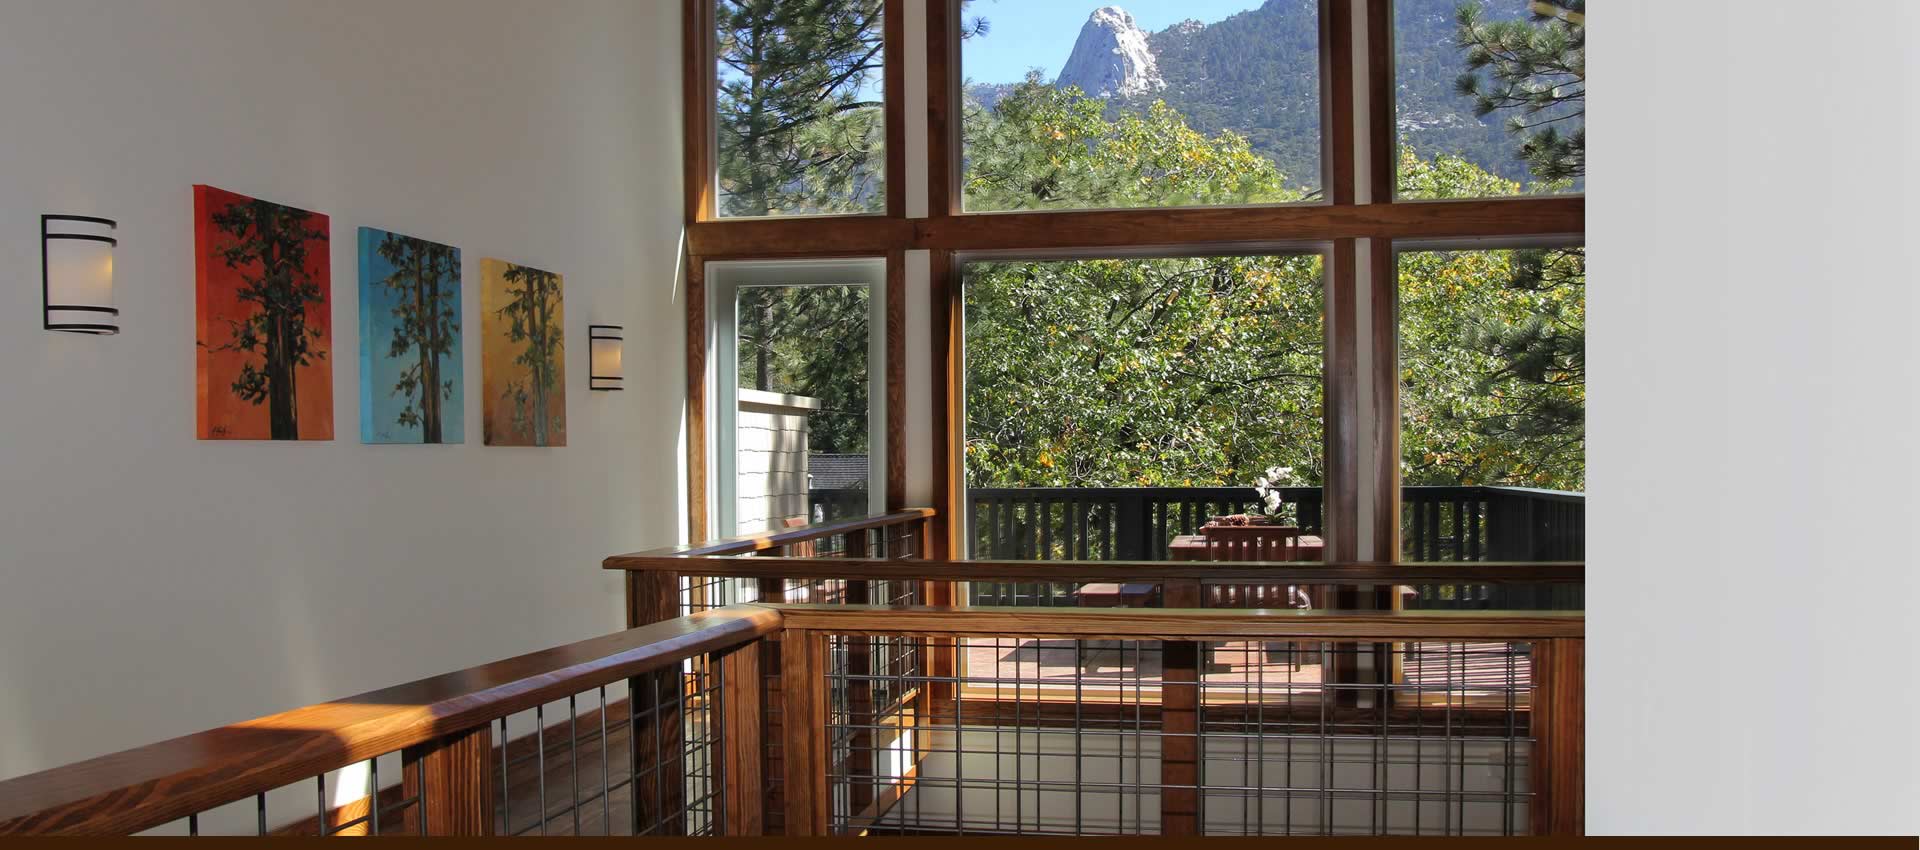 View of mountains and tahquitz peak from inside the lodge